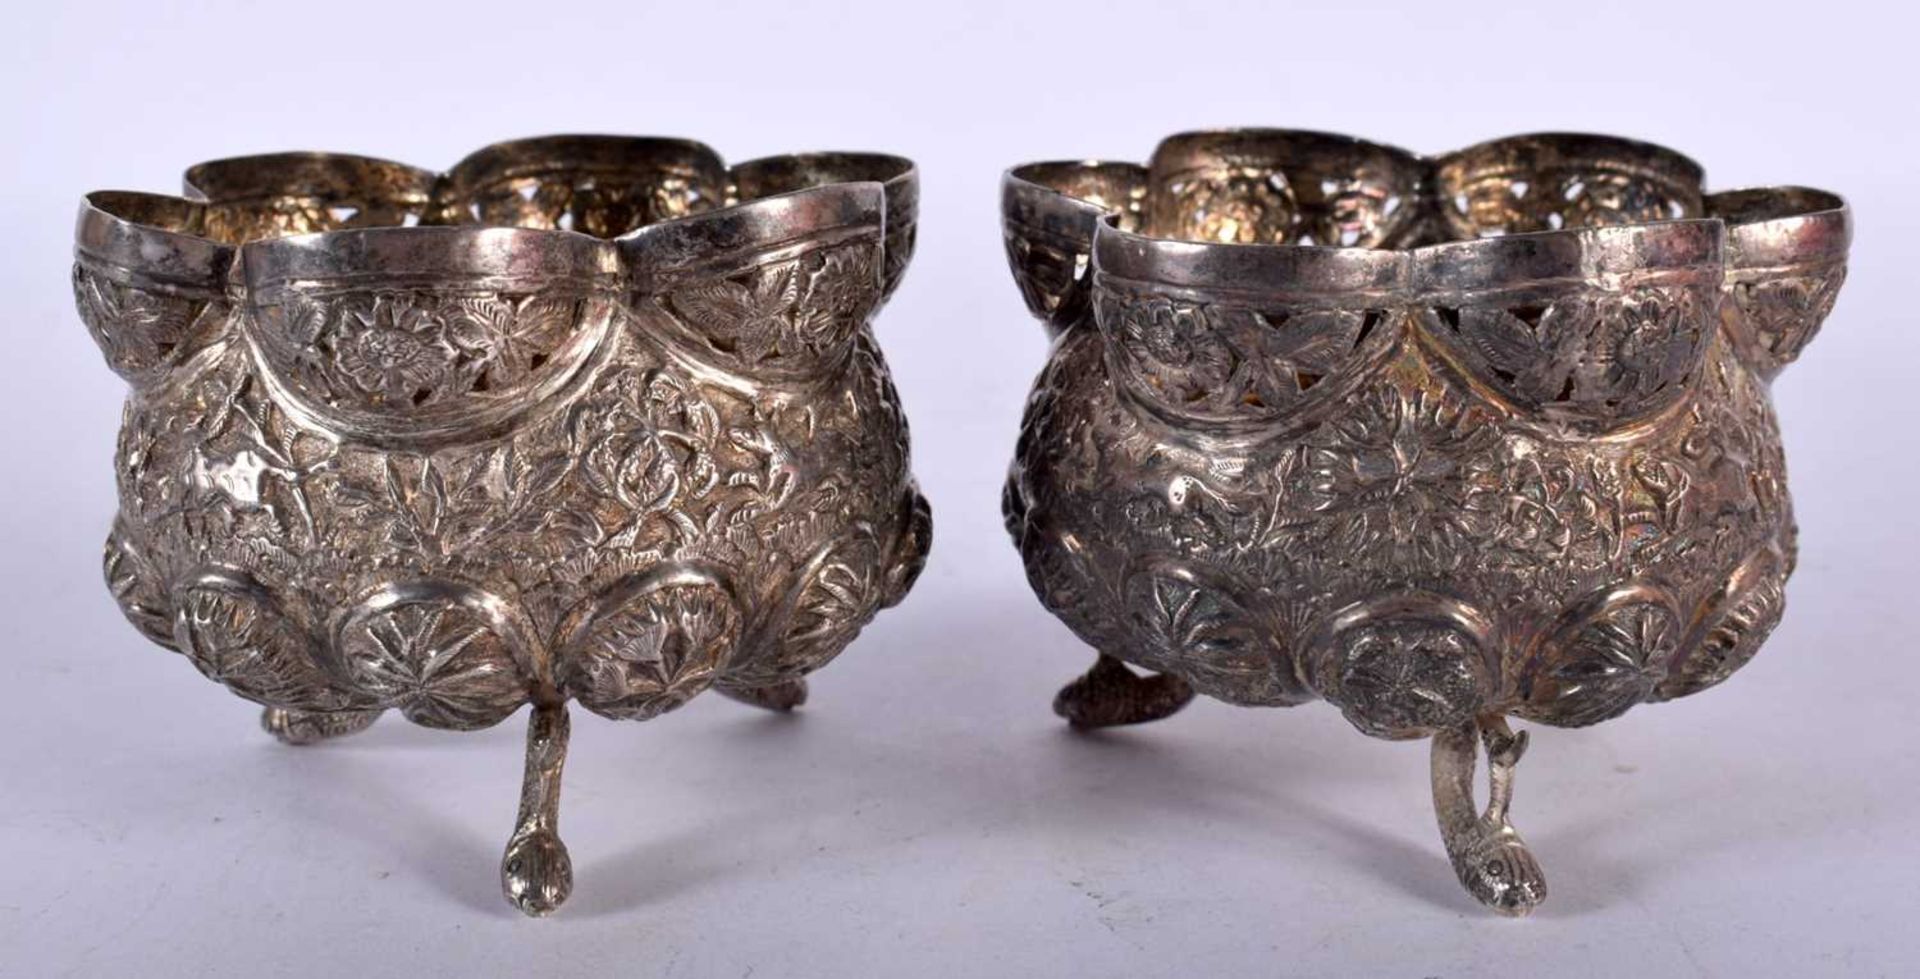 A Pair of Middle Eastern / Indian Silver Gilt Lined Condiment Bowls with Fish Feet. 7.7cm x 5.9cm,